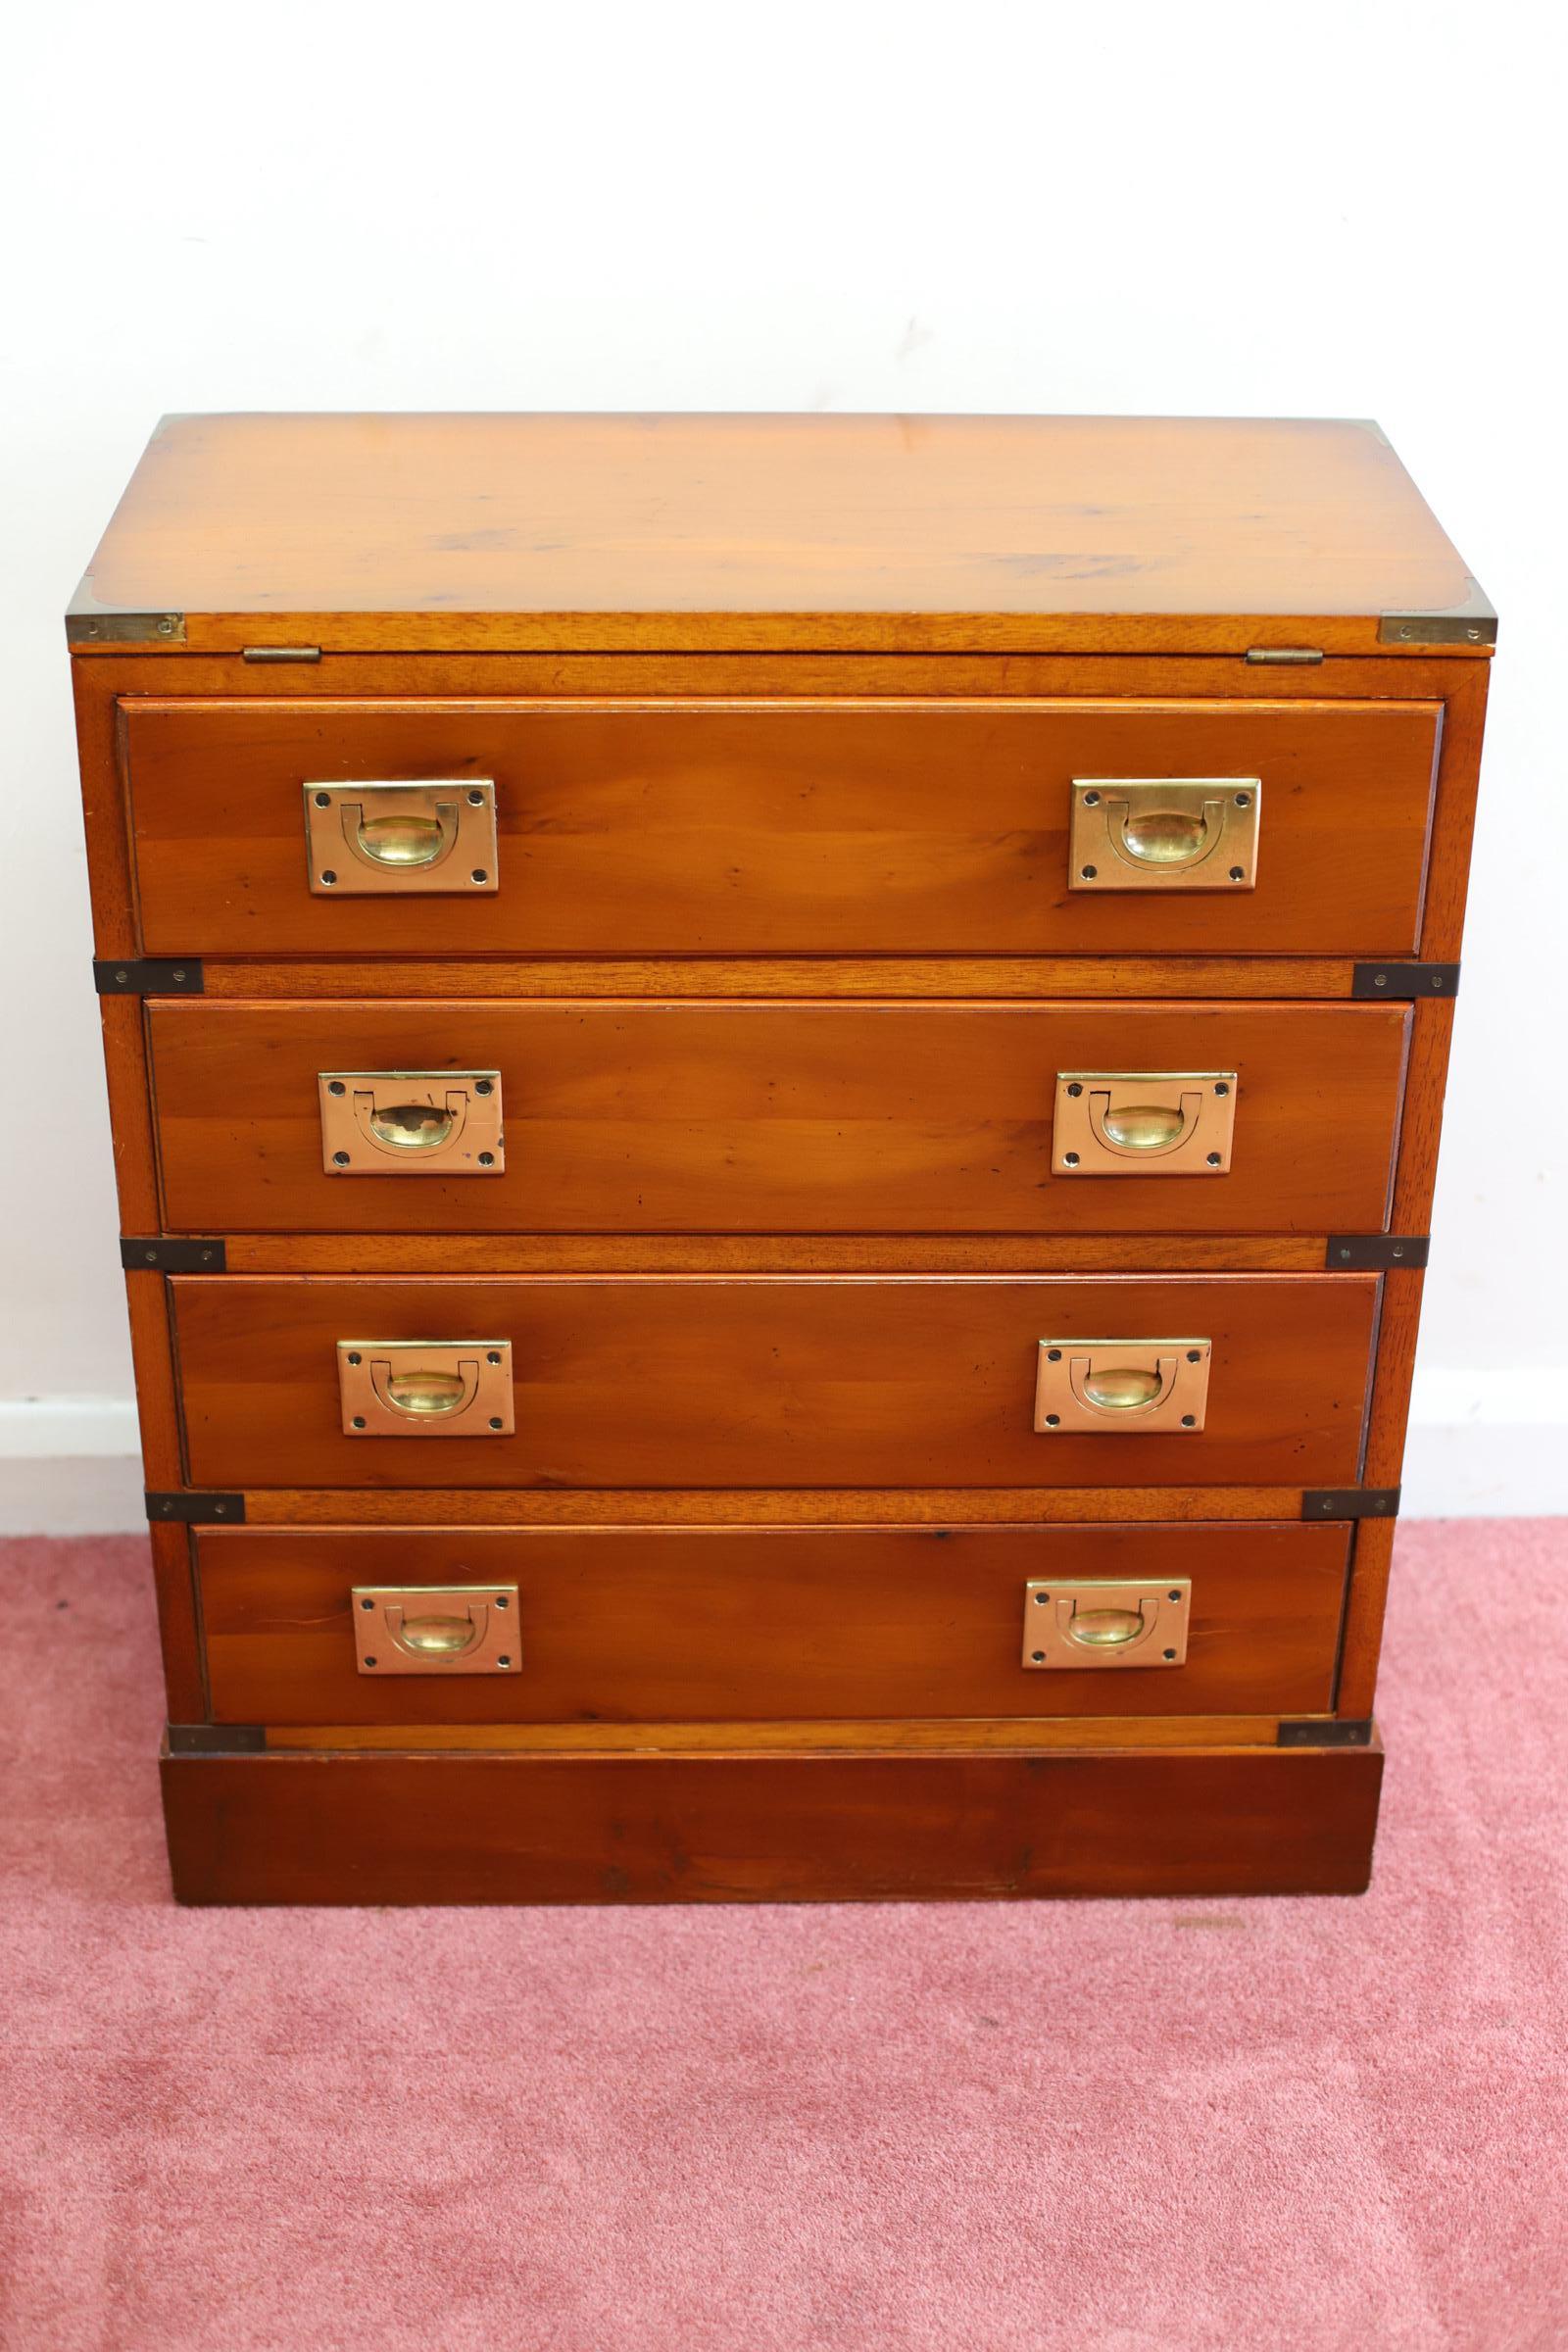 We delight to offer for sale this lovely yew wood military four drawer bachelors chest , brass corners and brass handles , in good condition .
Don't hesitate to contact me if you have any questions.
Please have a closer look at the pictures because